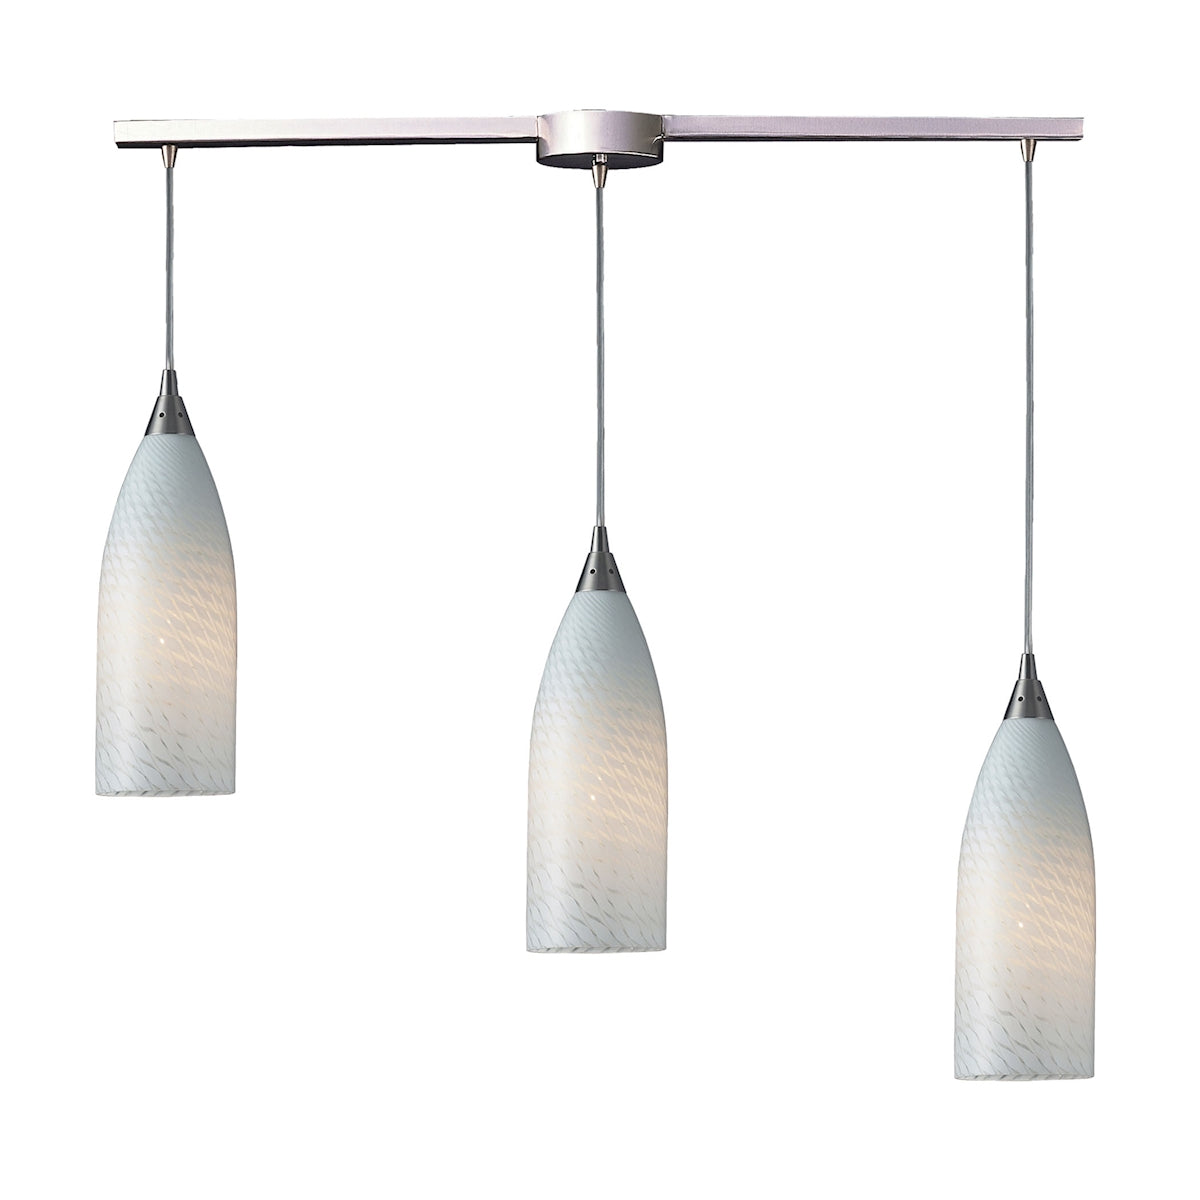 ELK Lighting 522-3L-WS Cilindro 3-Light Linear Pendant Fixture in Satin Nickel with White Swirl Glass